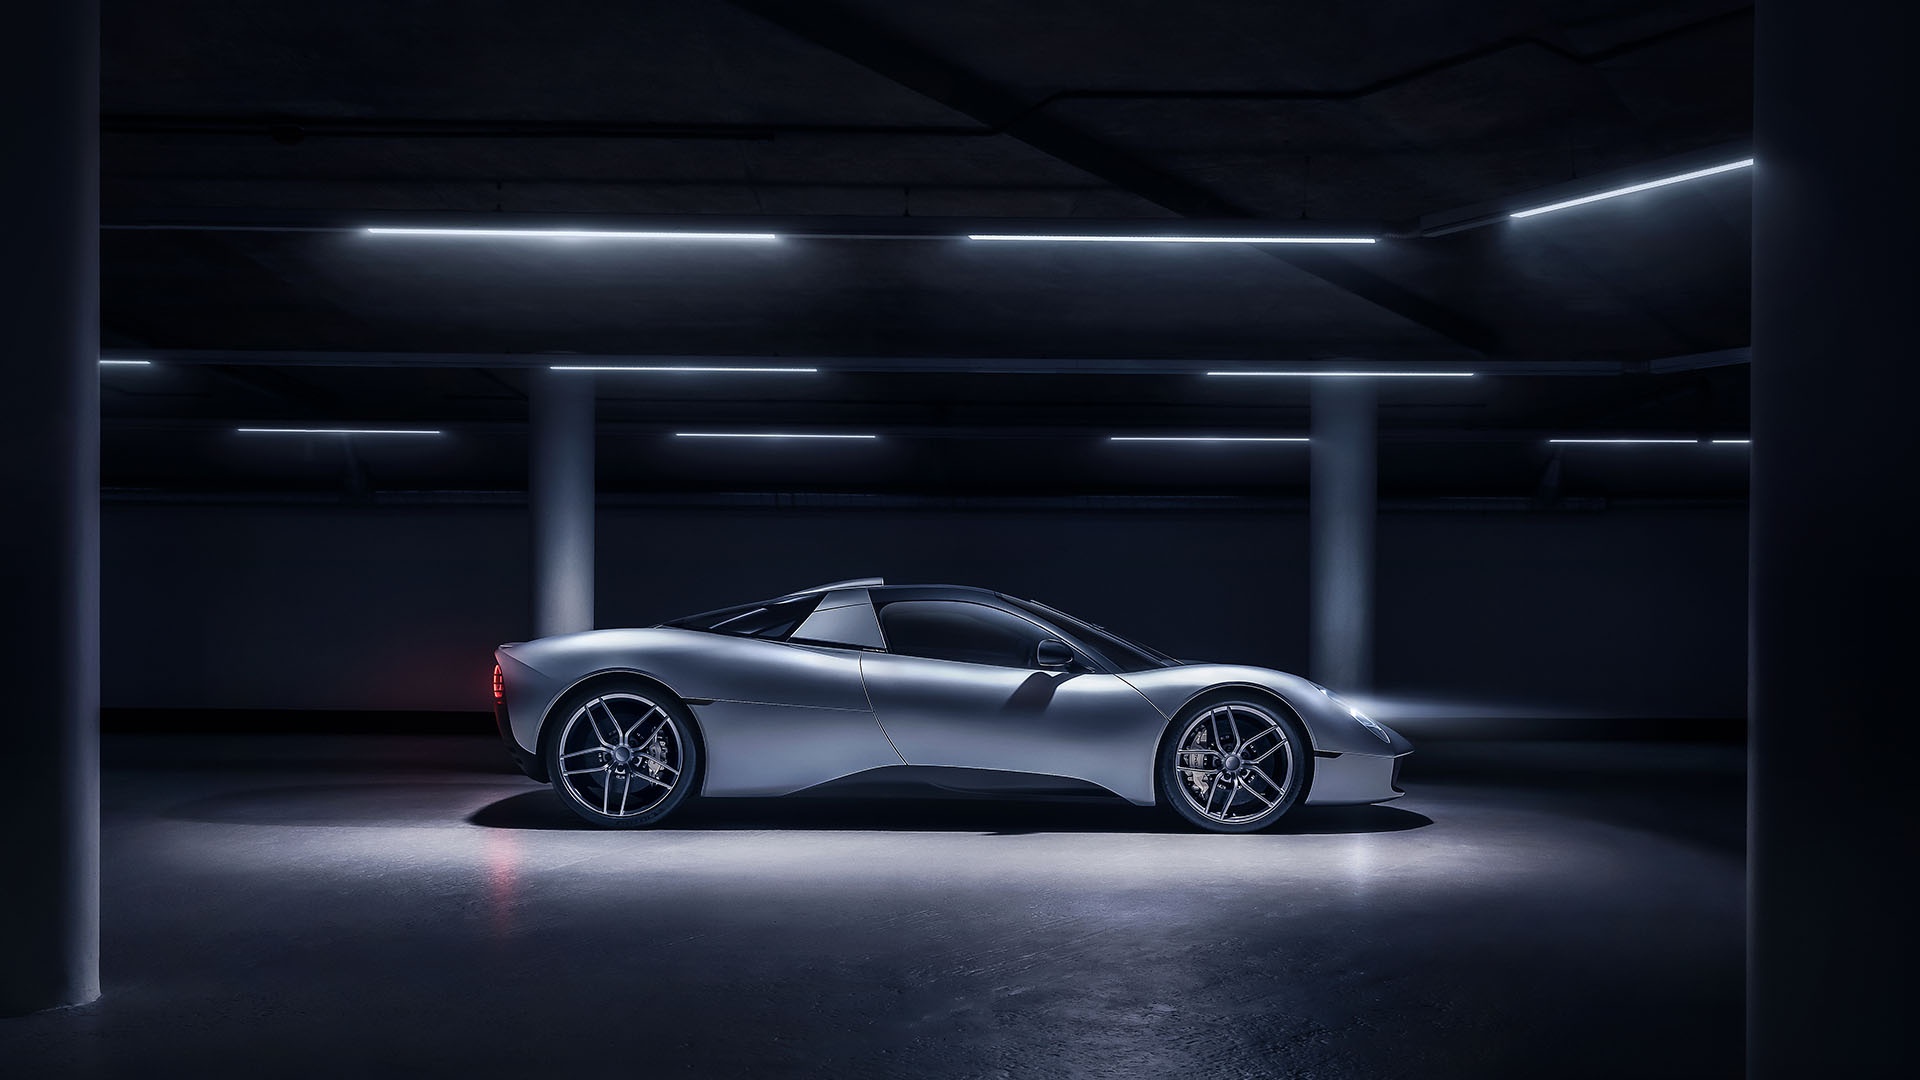 Gordon Murray Automotive reveals the all-new T.33, a timeless Supercar